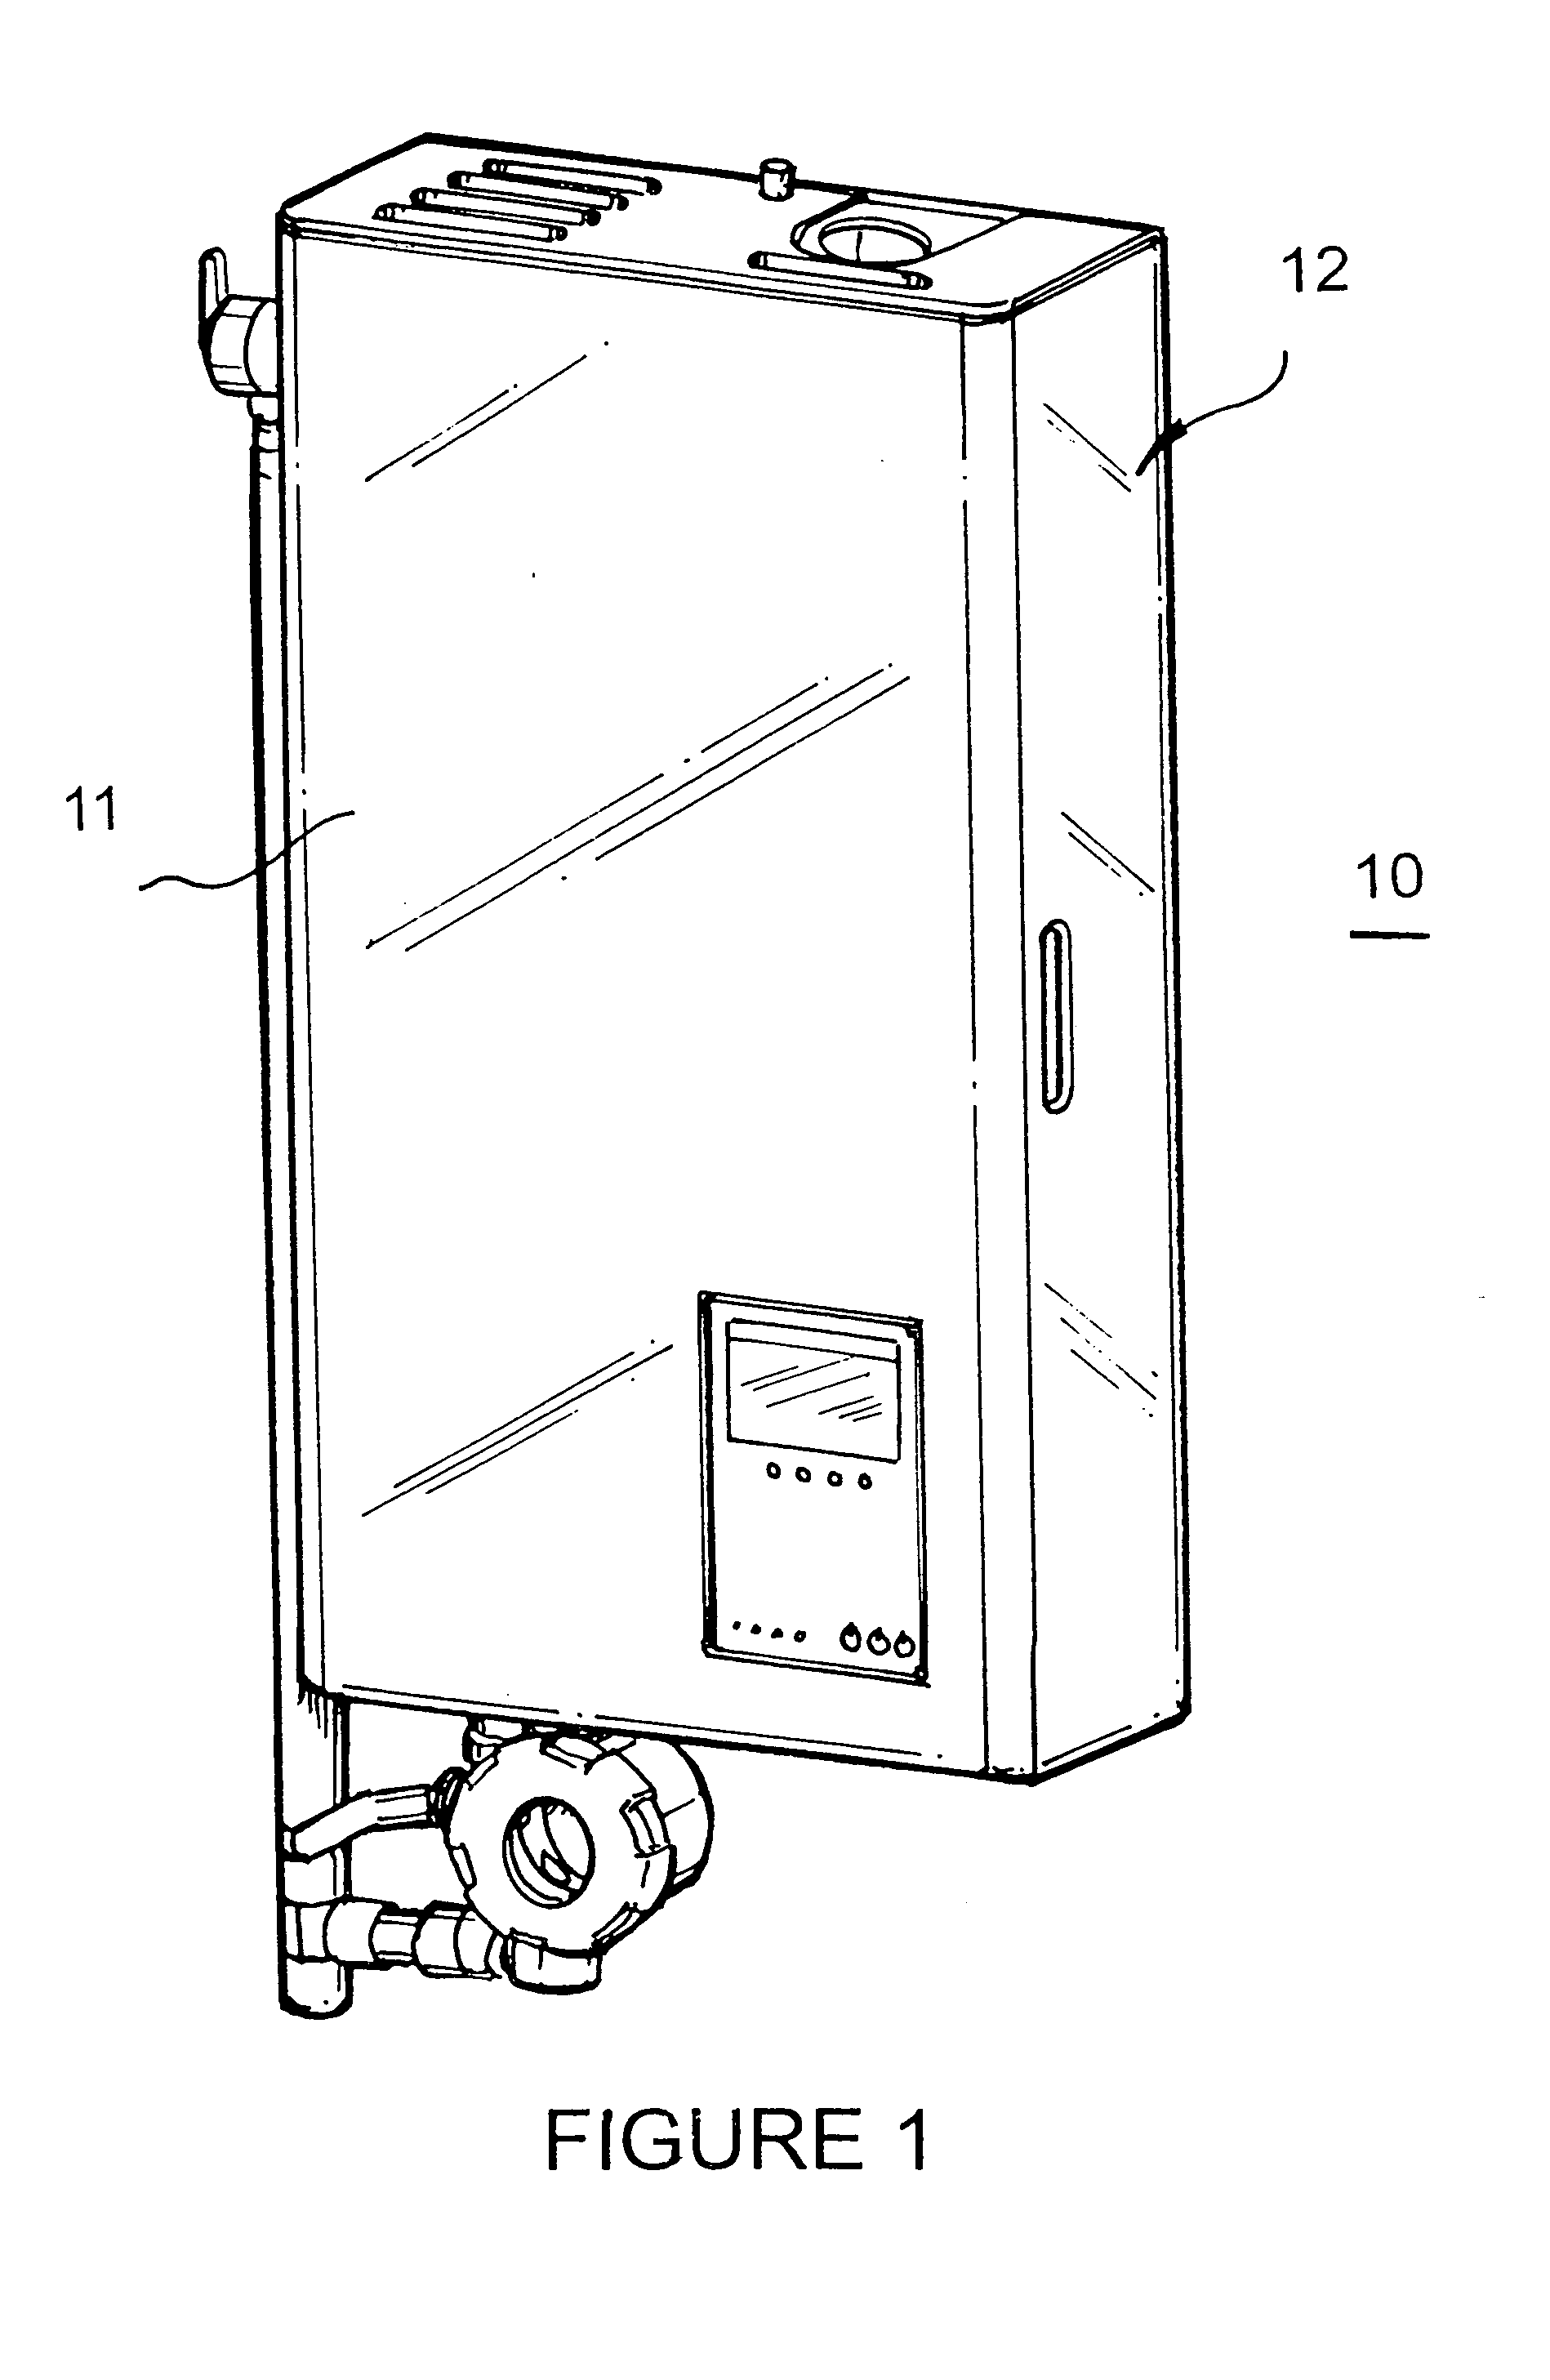 Modular tankless water heater control circuitry and method of operation